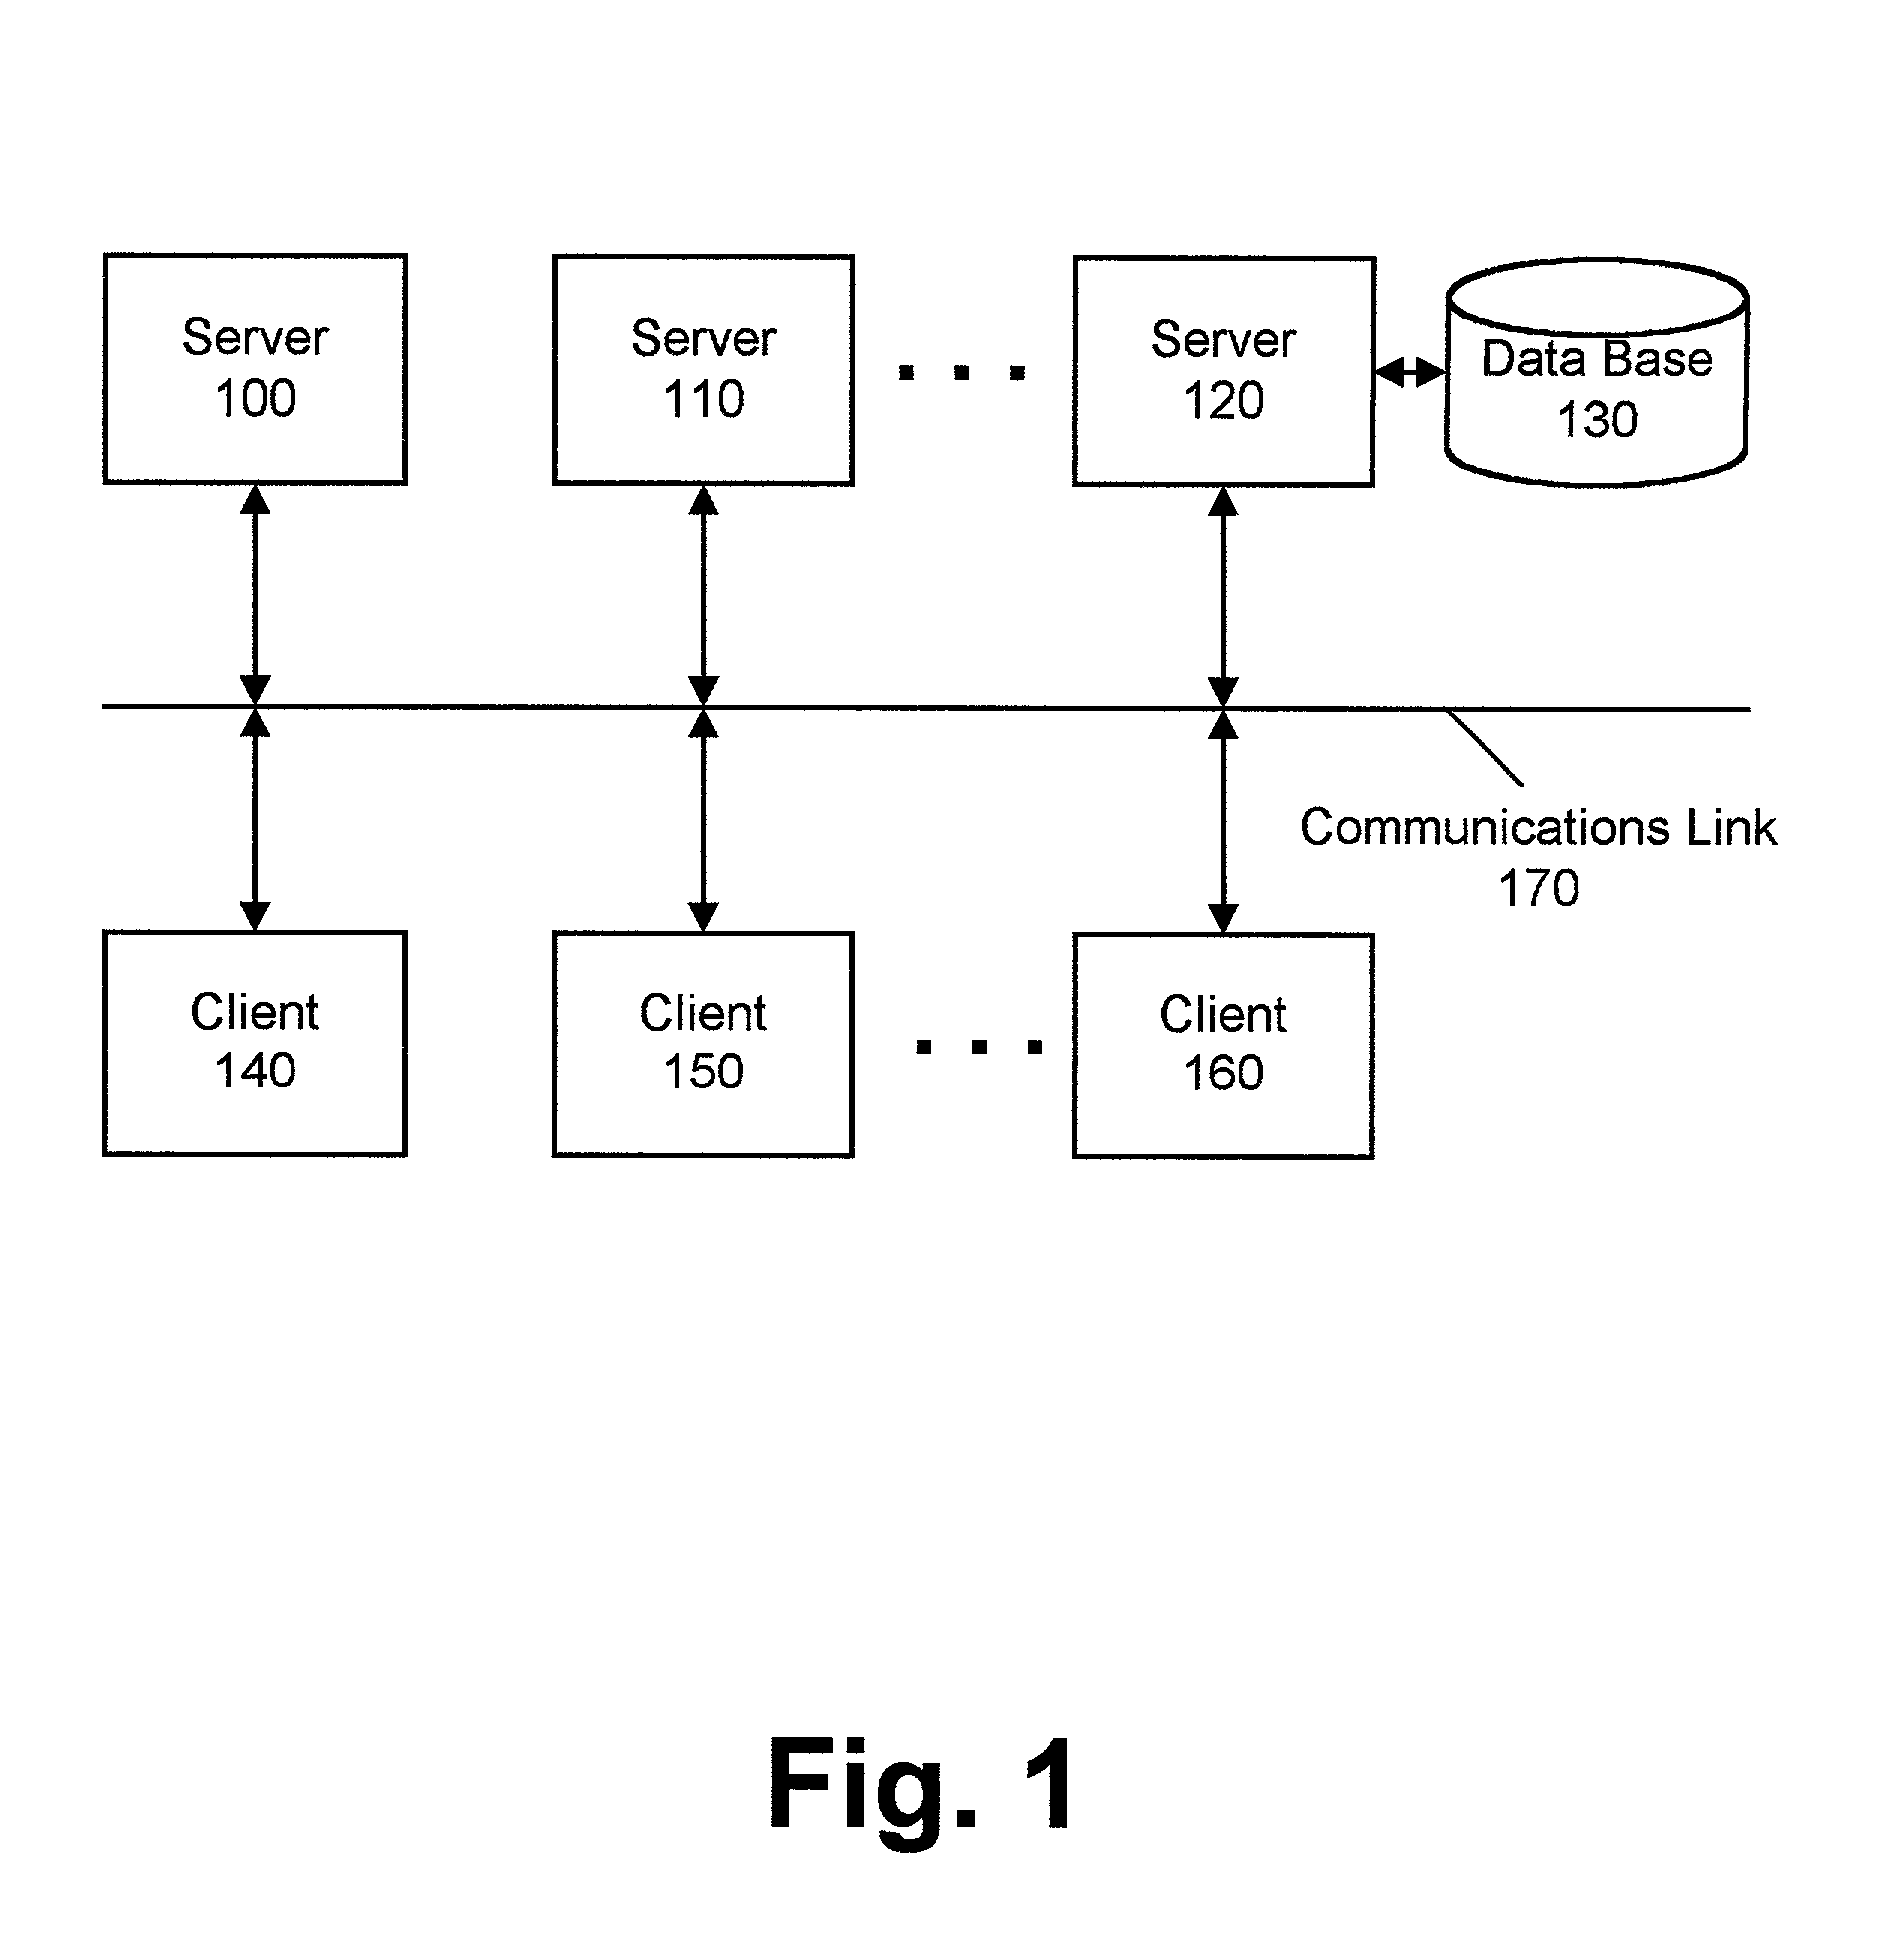 System and method for electronic bill pay and presentment